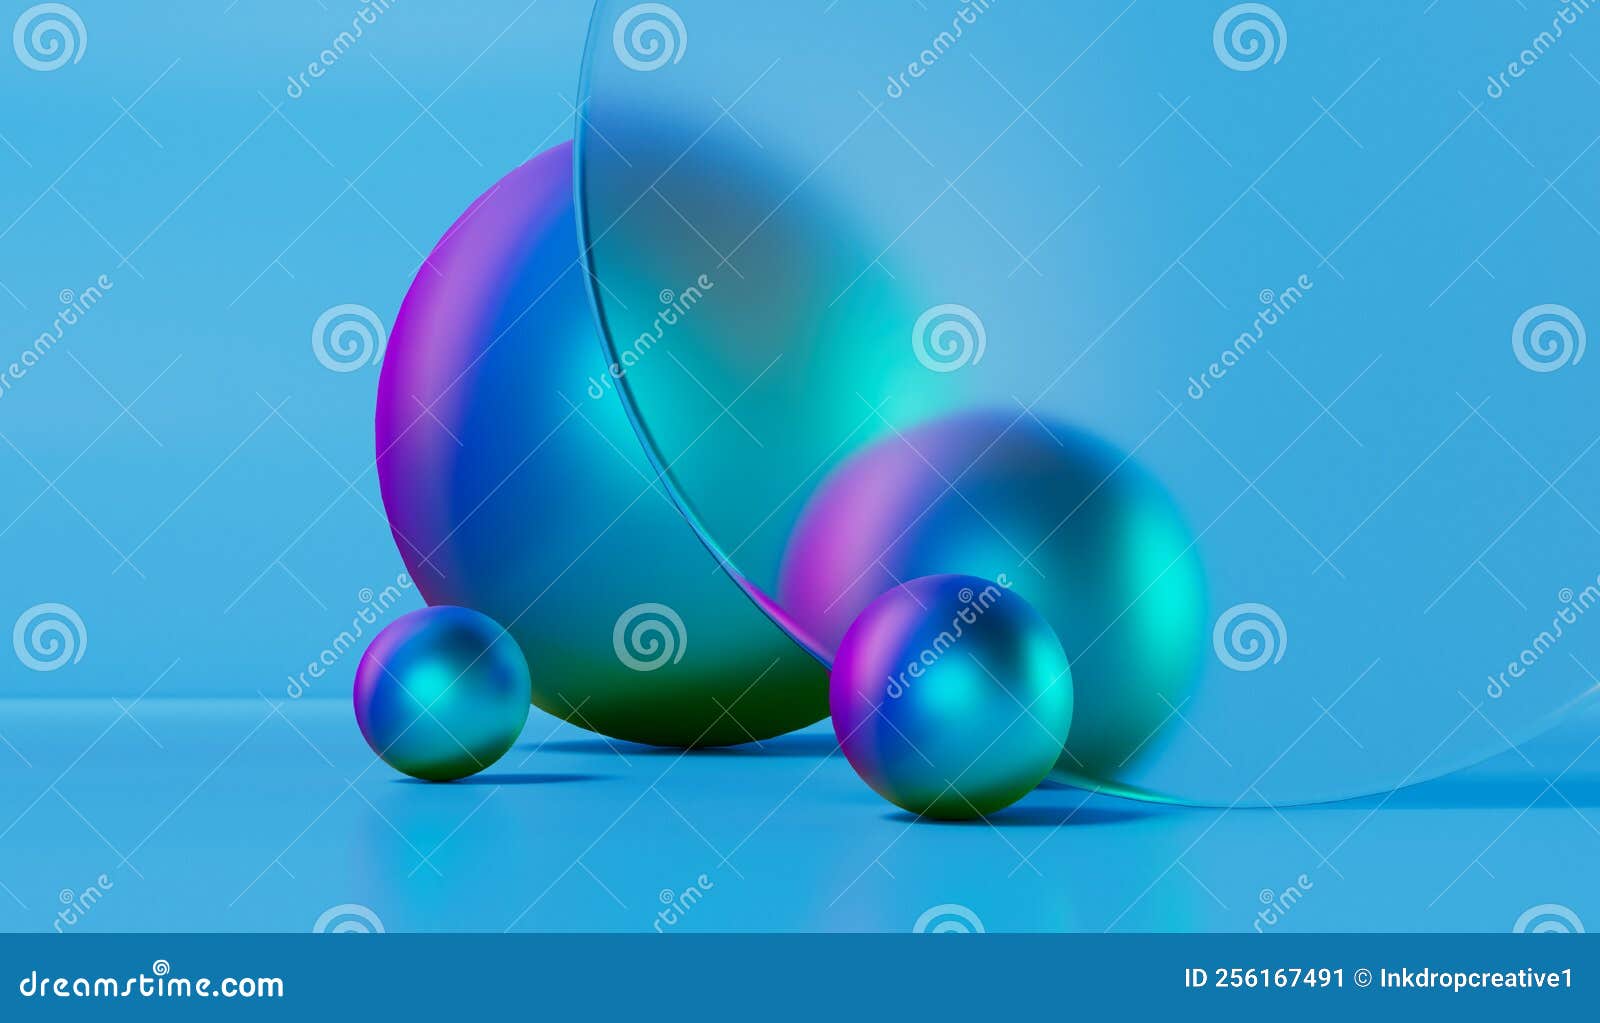 https://thumbs.dreamstime.com/z/abstract-blank-frosted-glass-background-glass-morphism-effect-d-rendering-abstract-blank-frosted-glass-background-glass-morphism-256167491.jpg